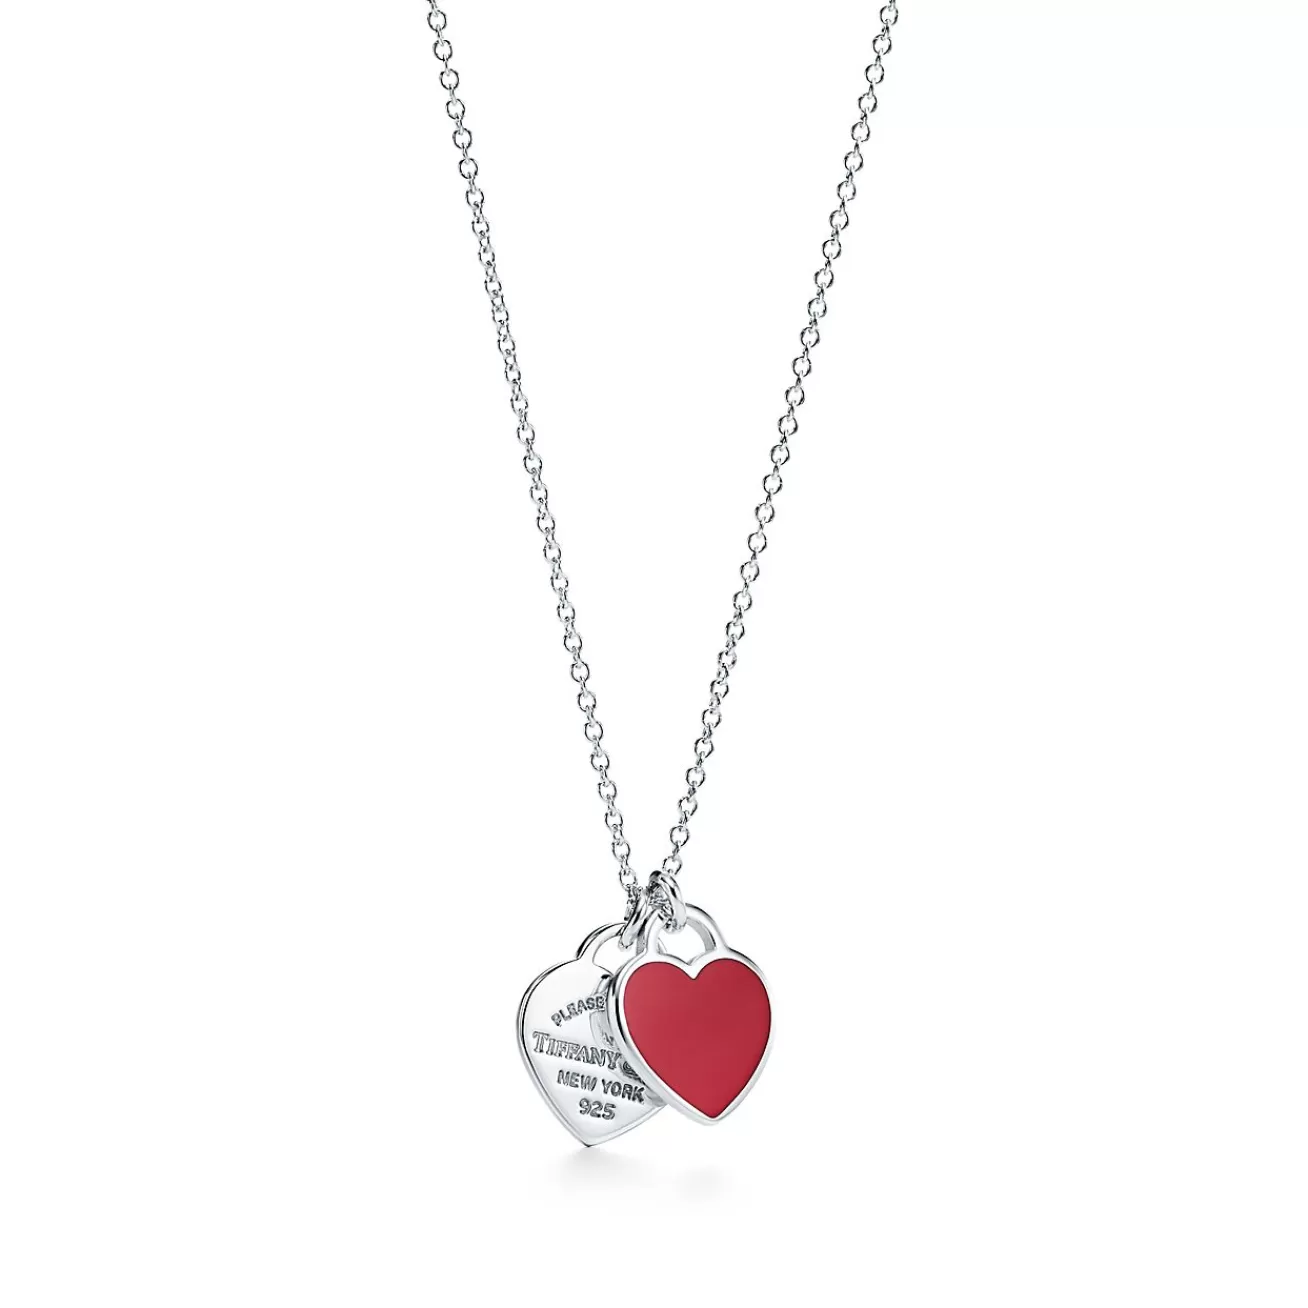 Tiffany & Co. Return to Tiffany® Red Double Heart Tag Pendant in Silver, Mini | ^ Necklaces & Pendants | Sterling Silver Jewelry